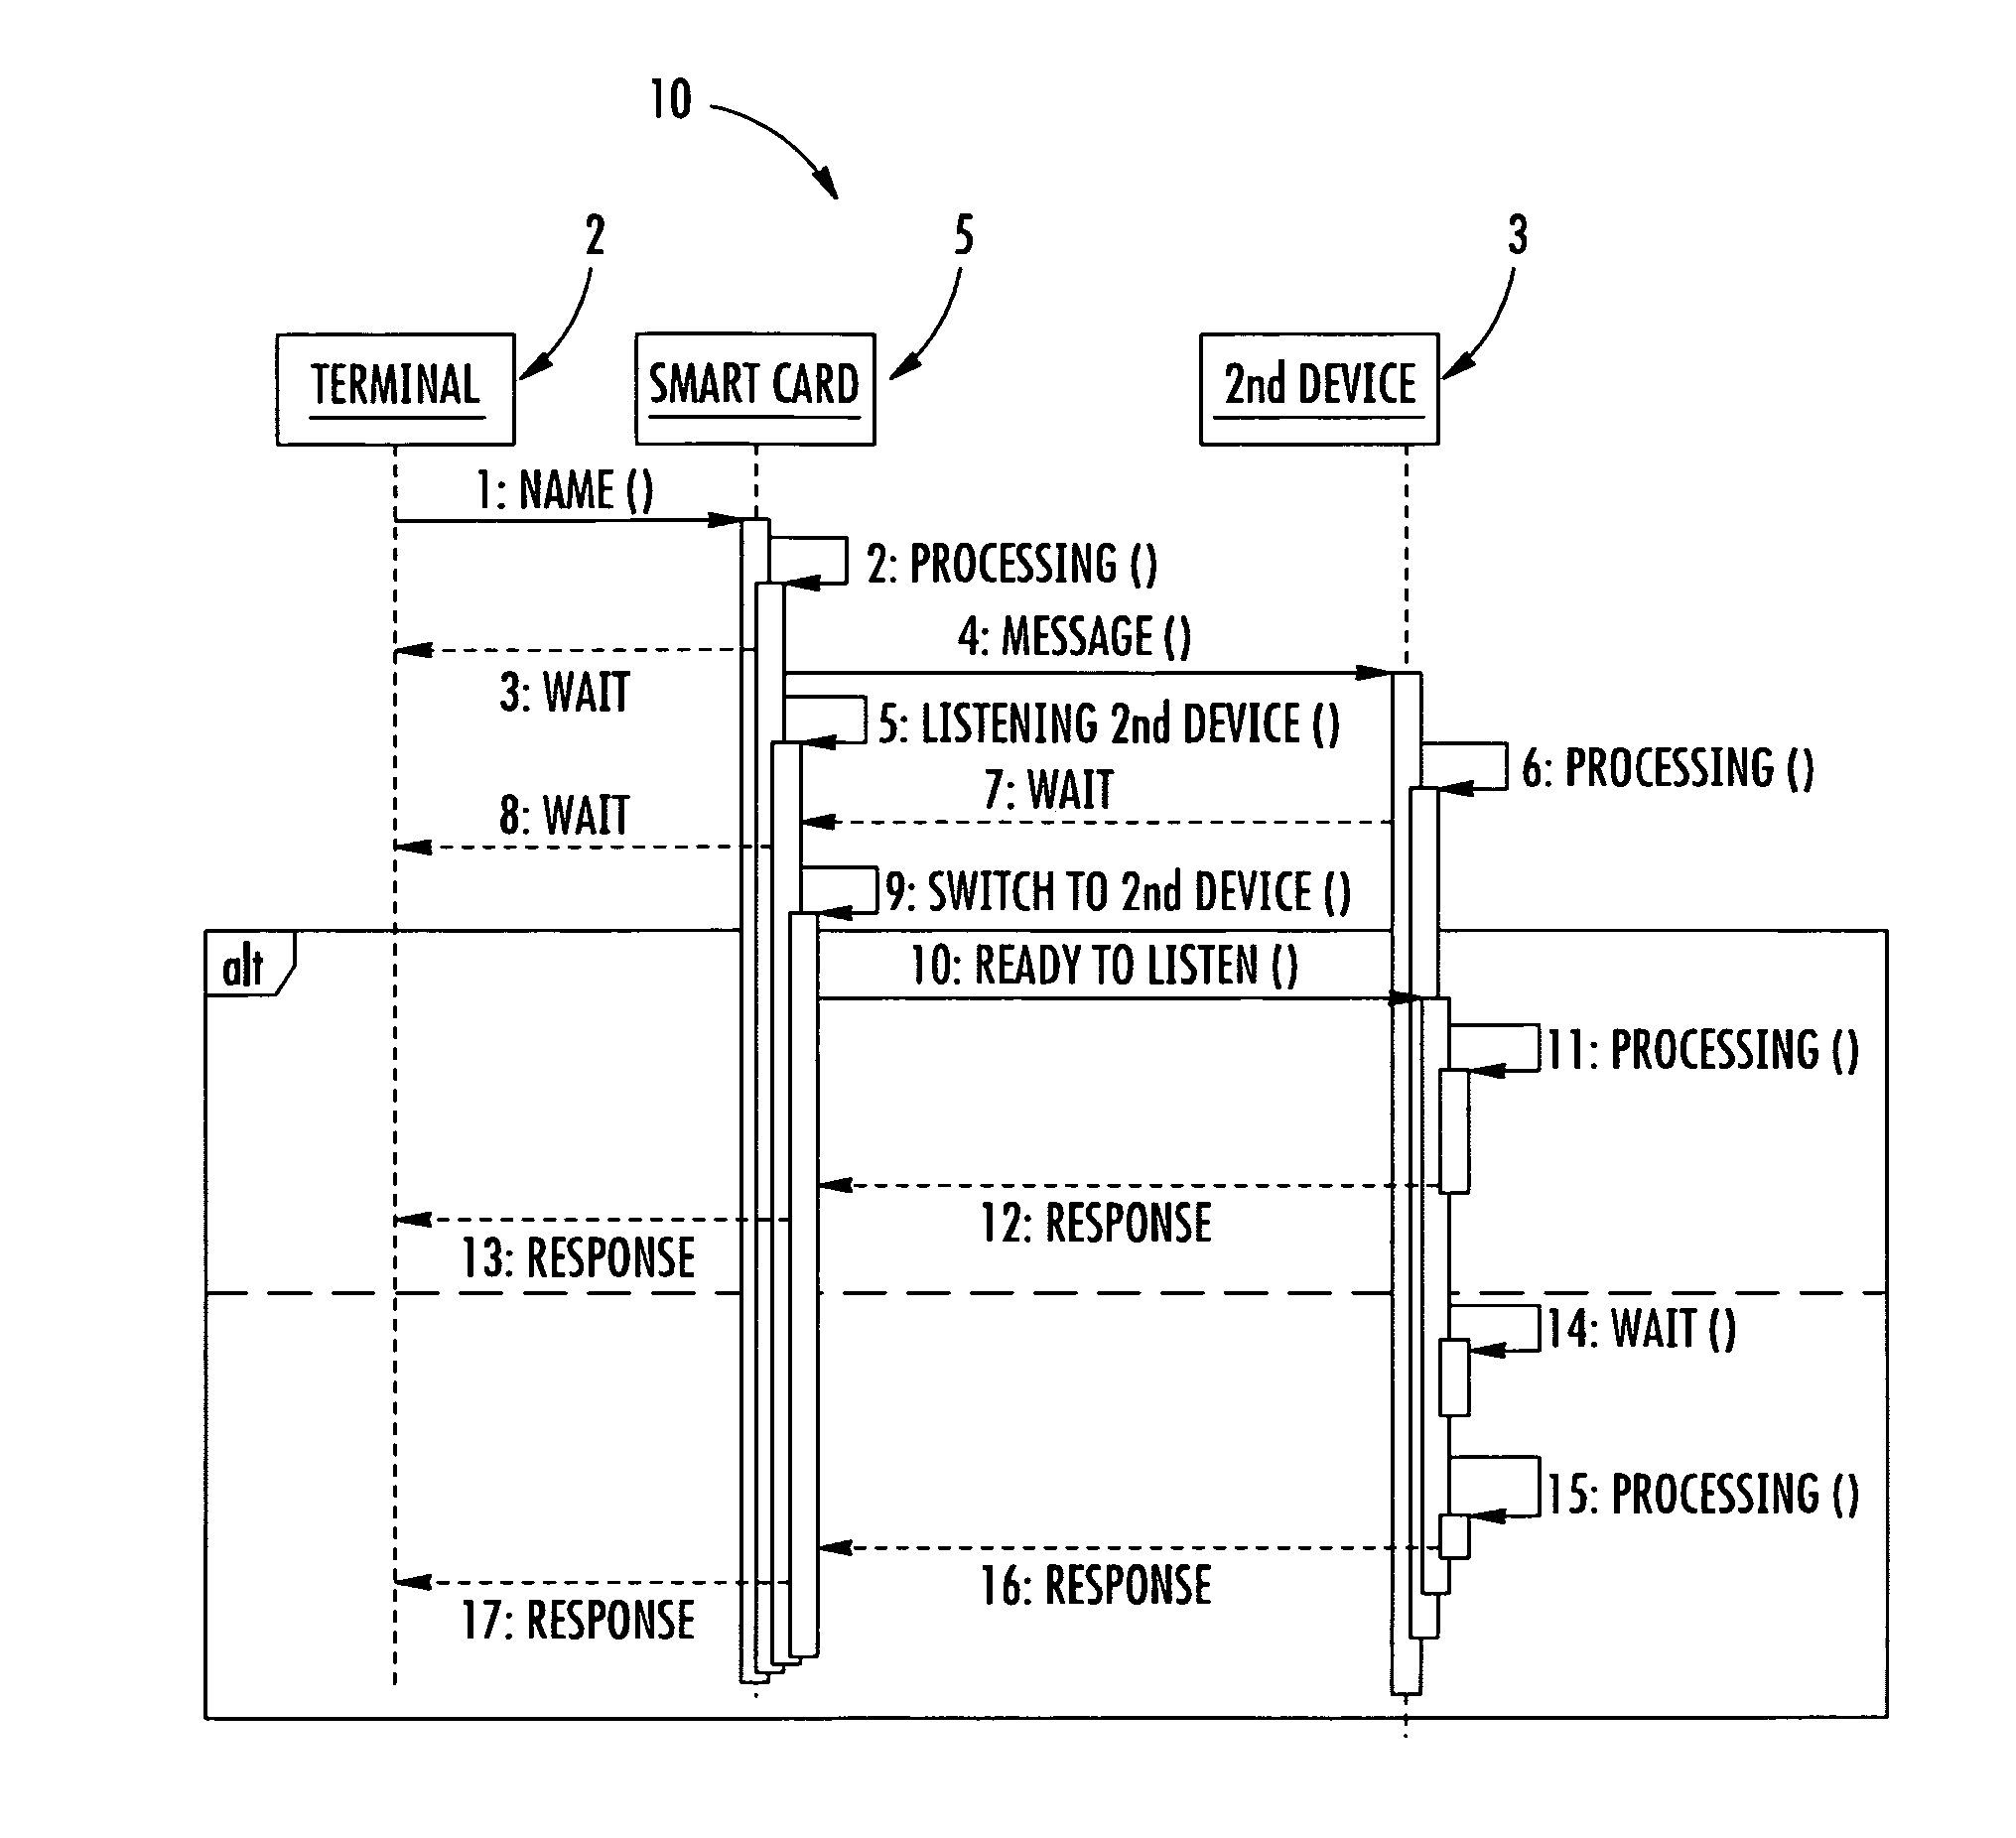 IC card comprising a main device and an additional device